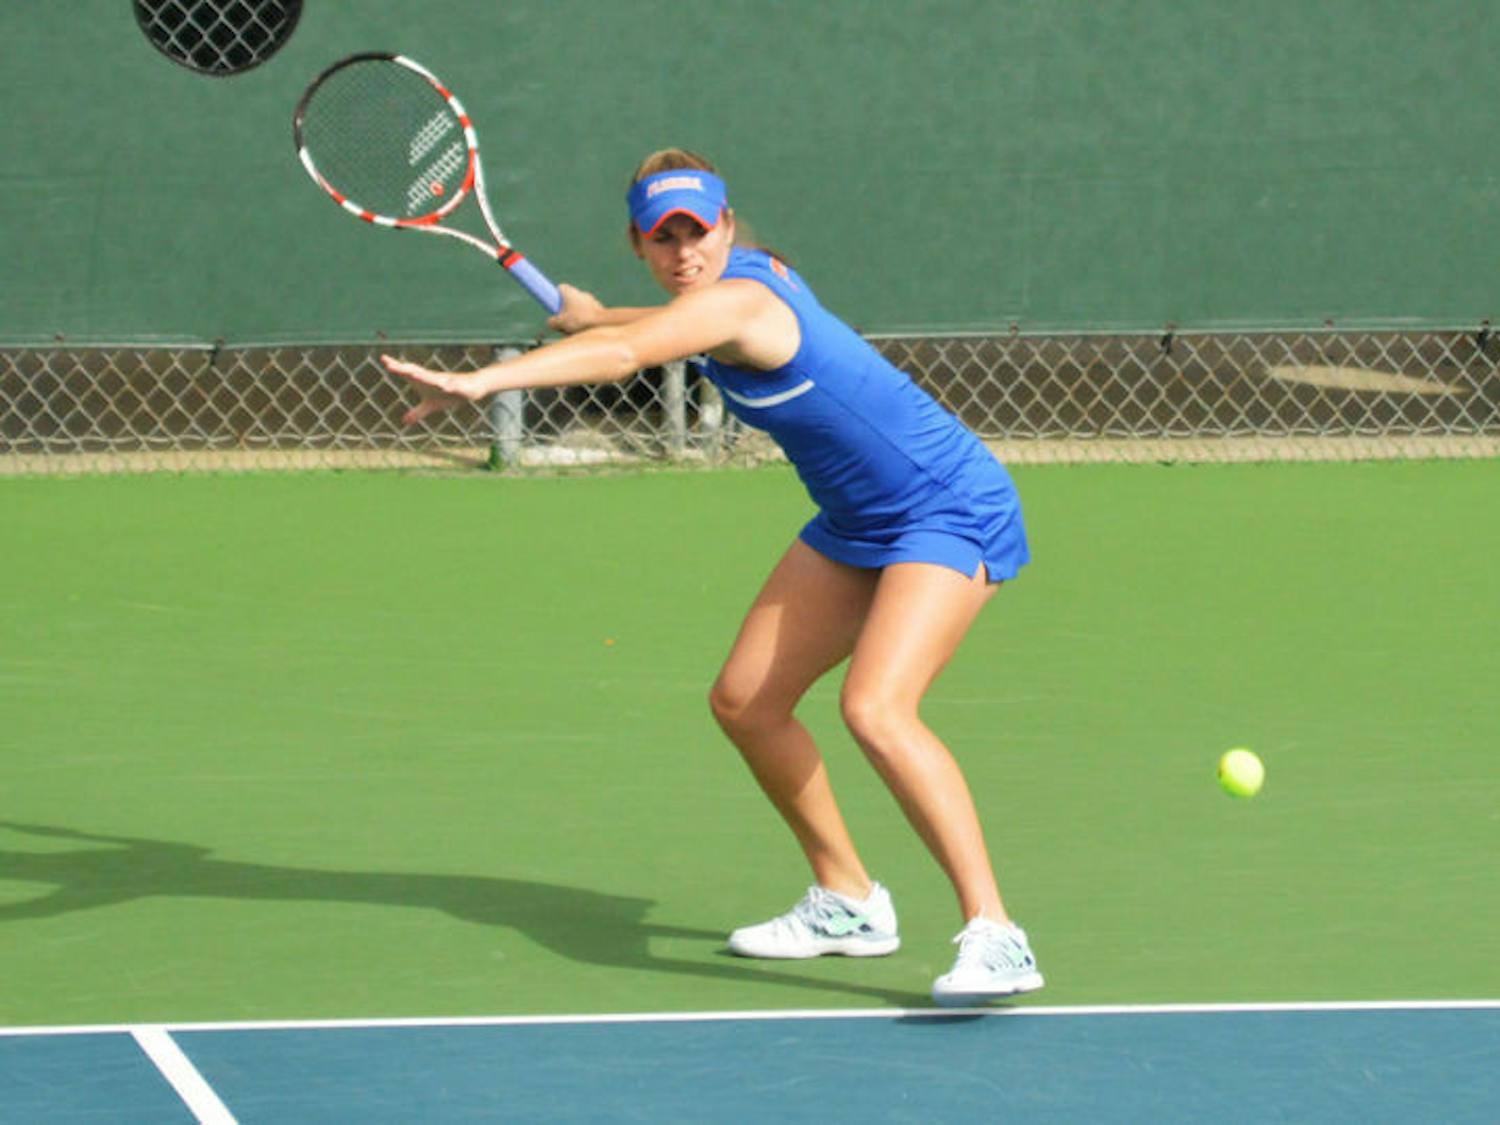 Belinda Woolcock swings at the ball during Florida’s 4-0 win against Louisville on Jan. 25 at the Ring Tennis Complex.